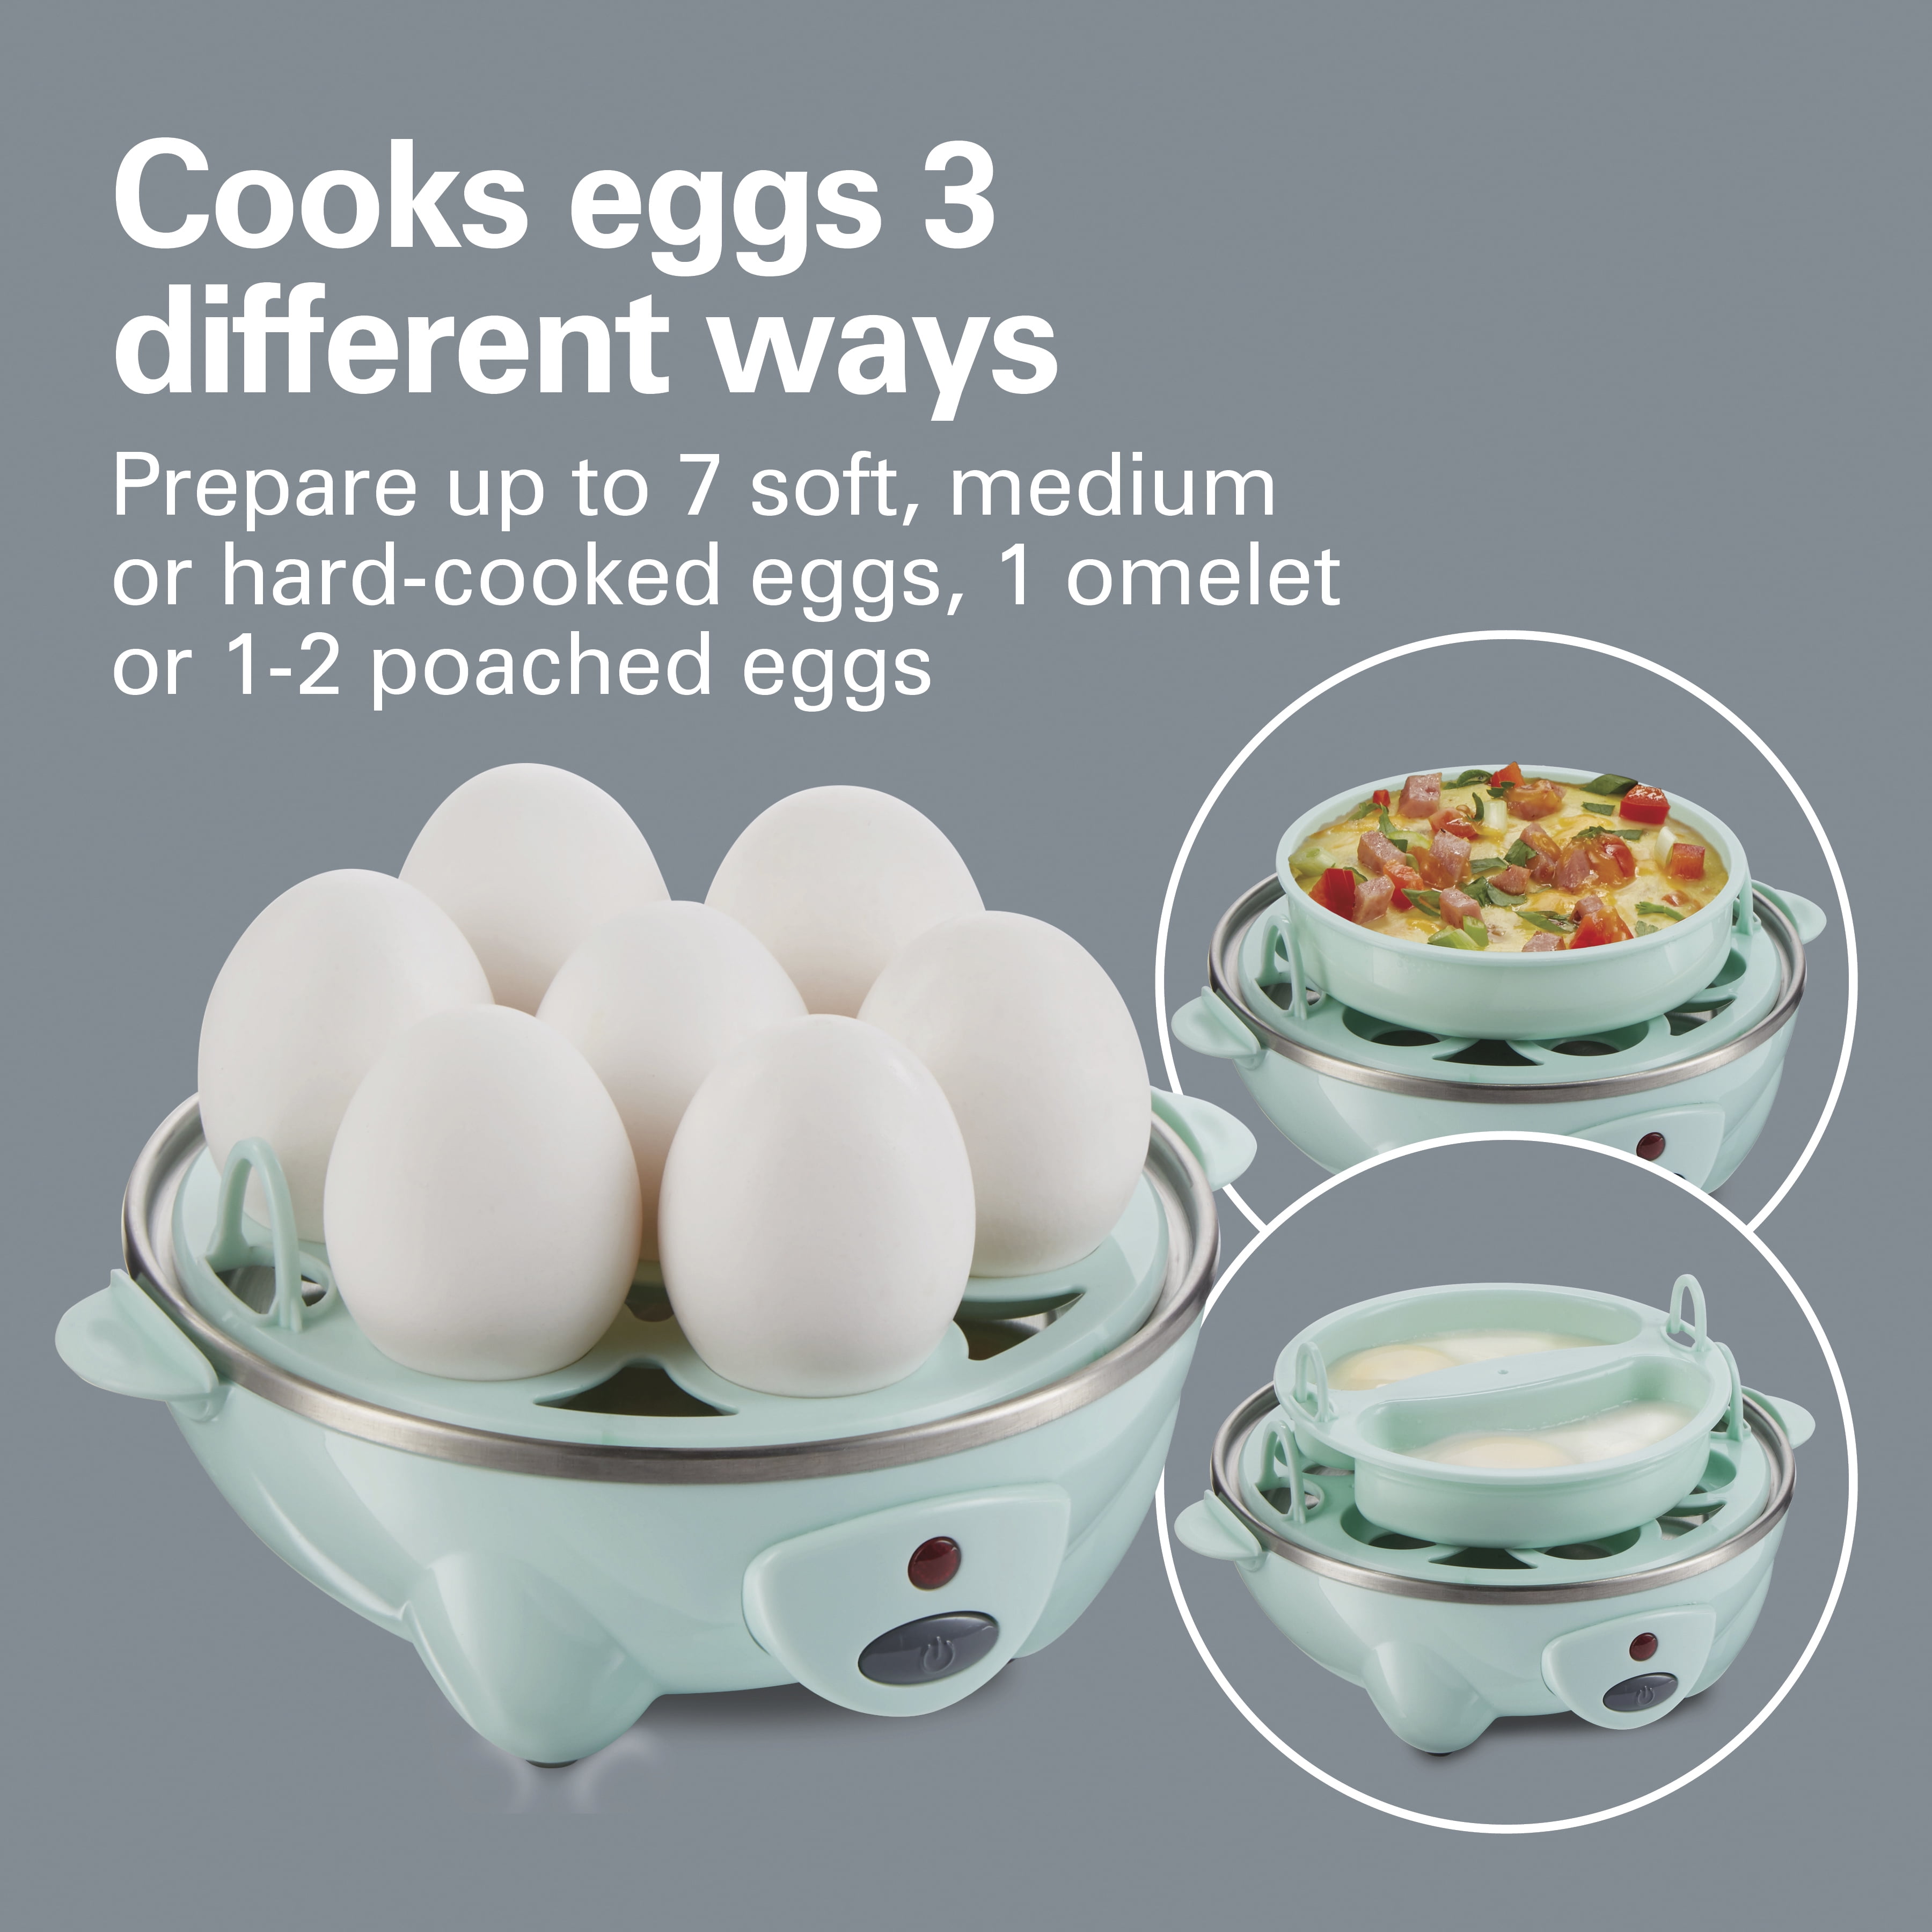 Hamilton Beach Egg Cooker with Built-In Timer and Poaching Tray, 7 Eggs,  Black, 25500 